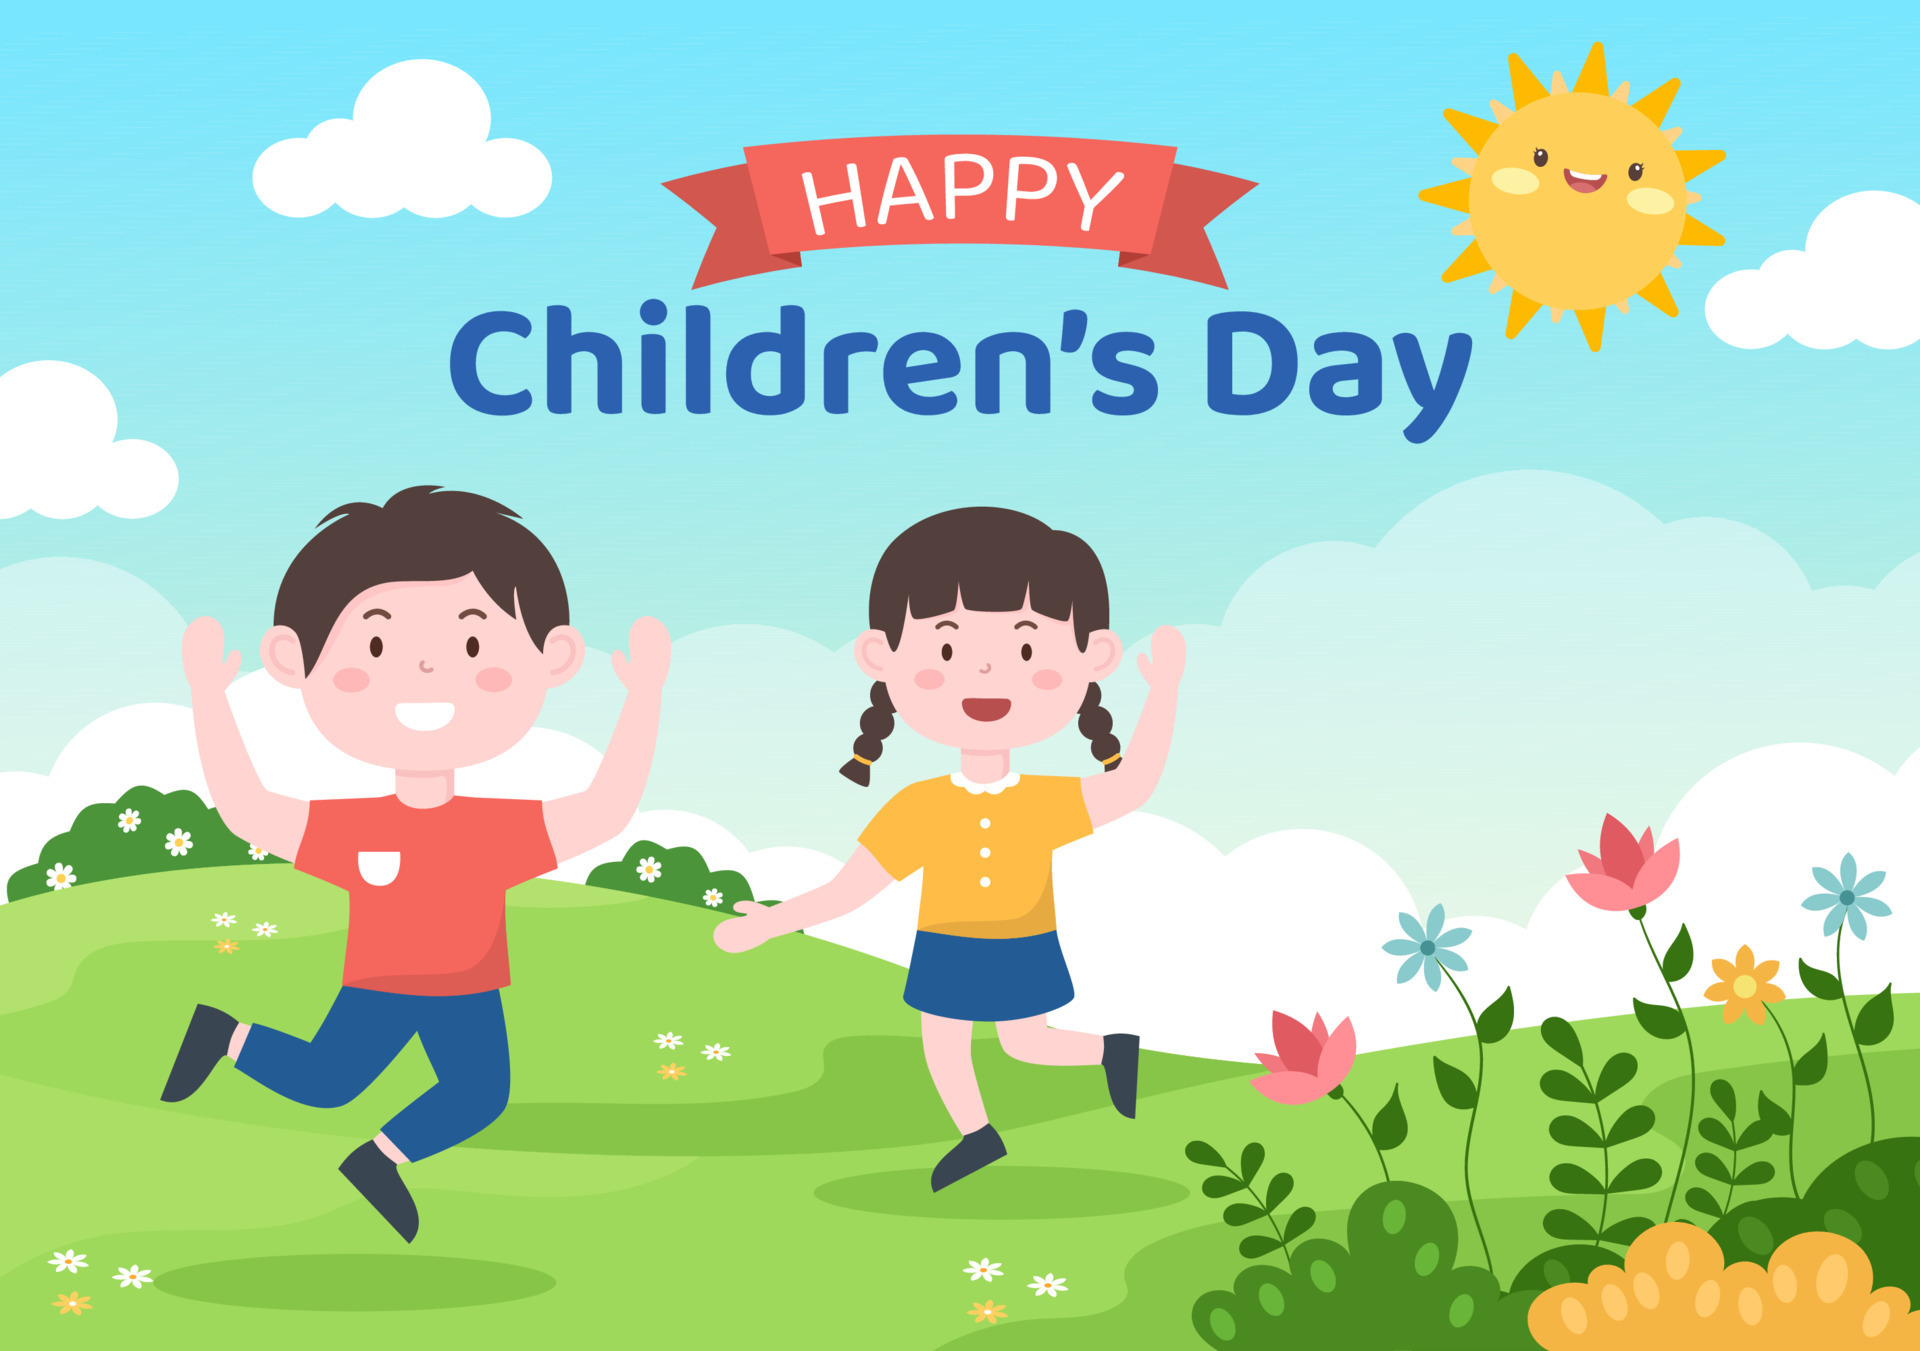 Happy Children's Day Celebration With Boys and Girls Playing in Cartoon ...